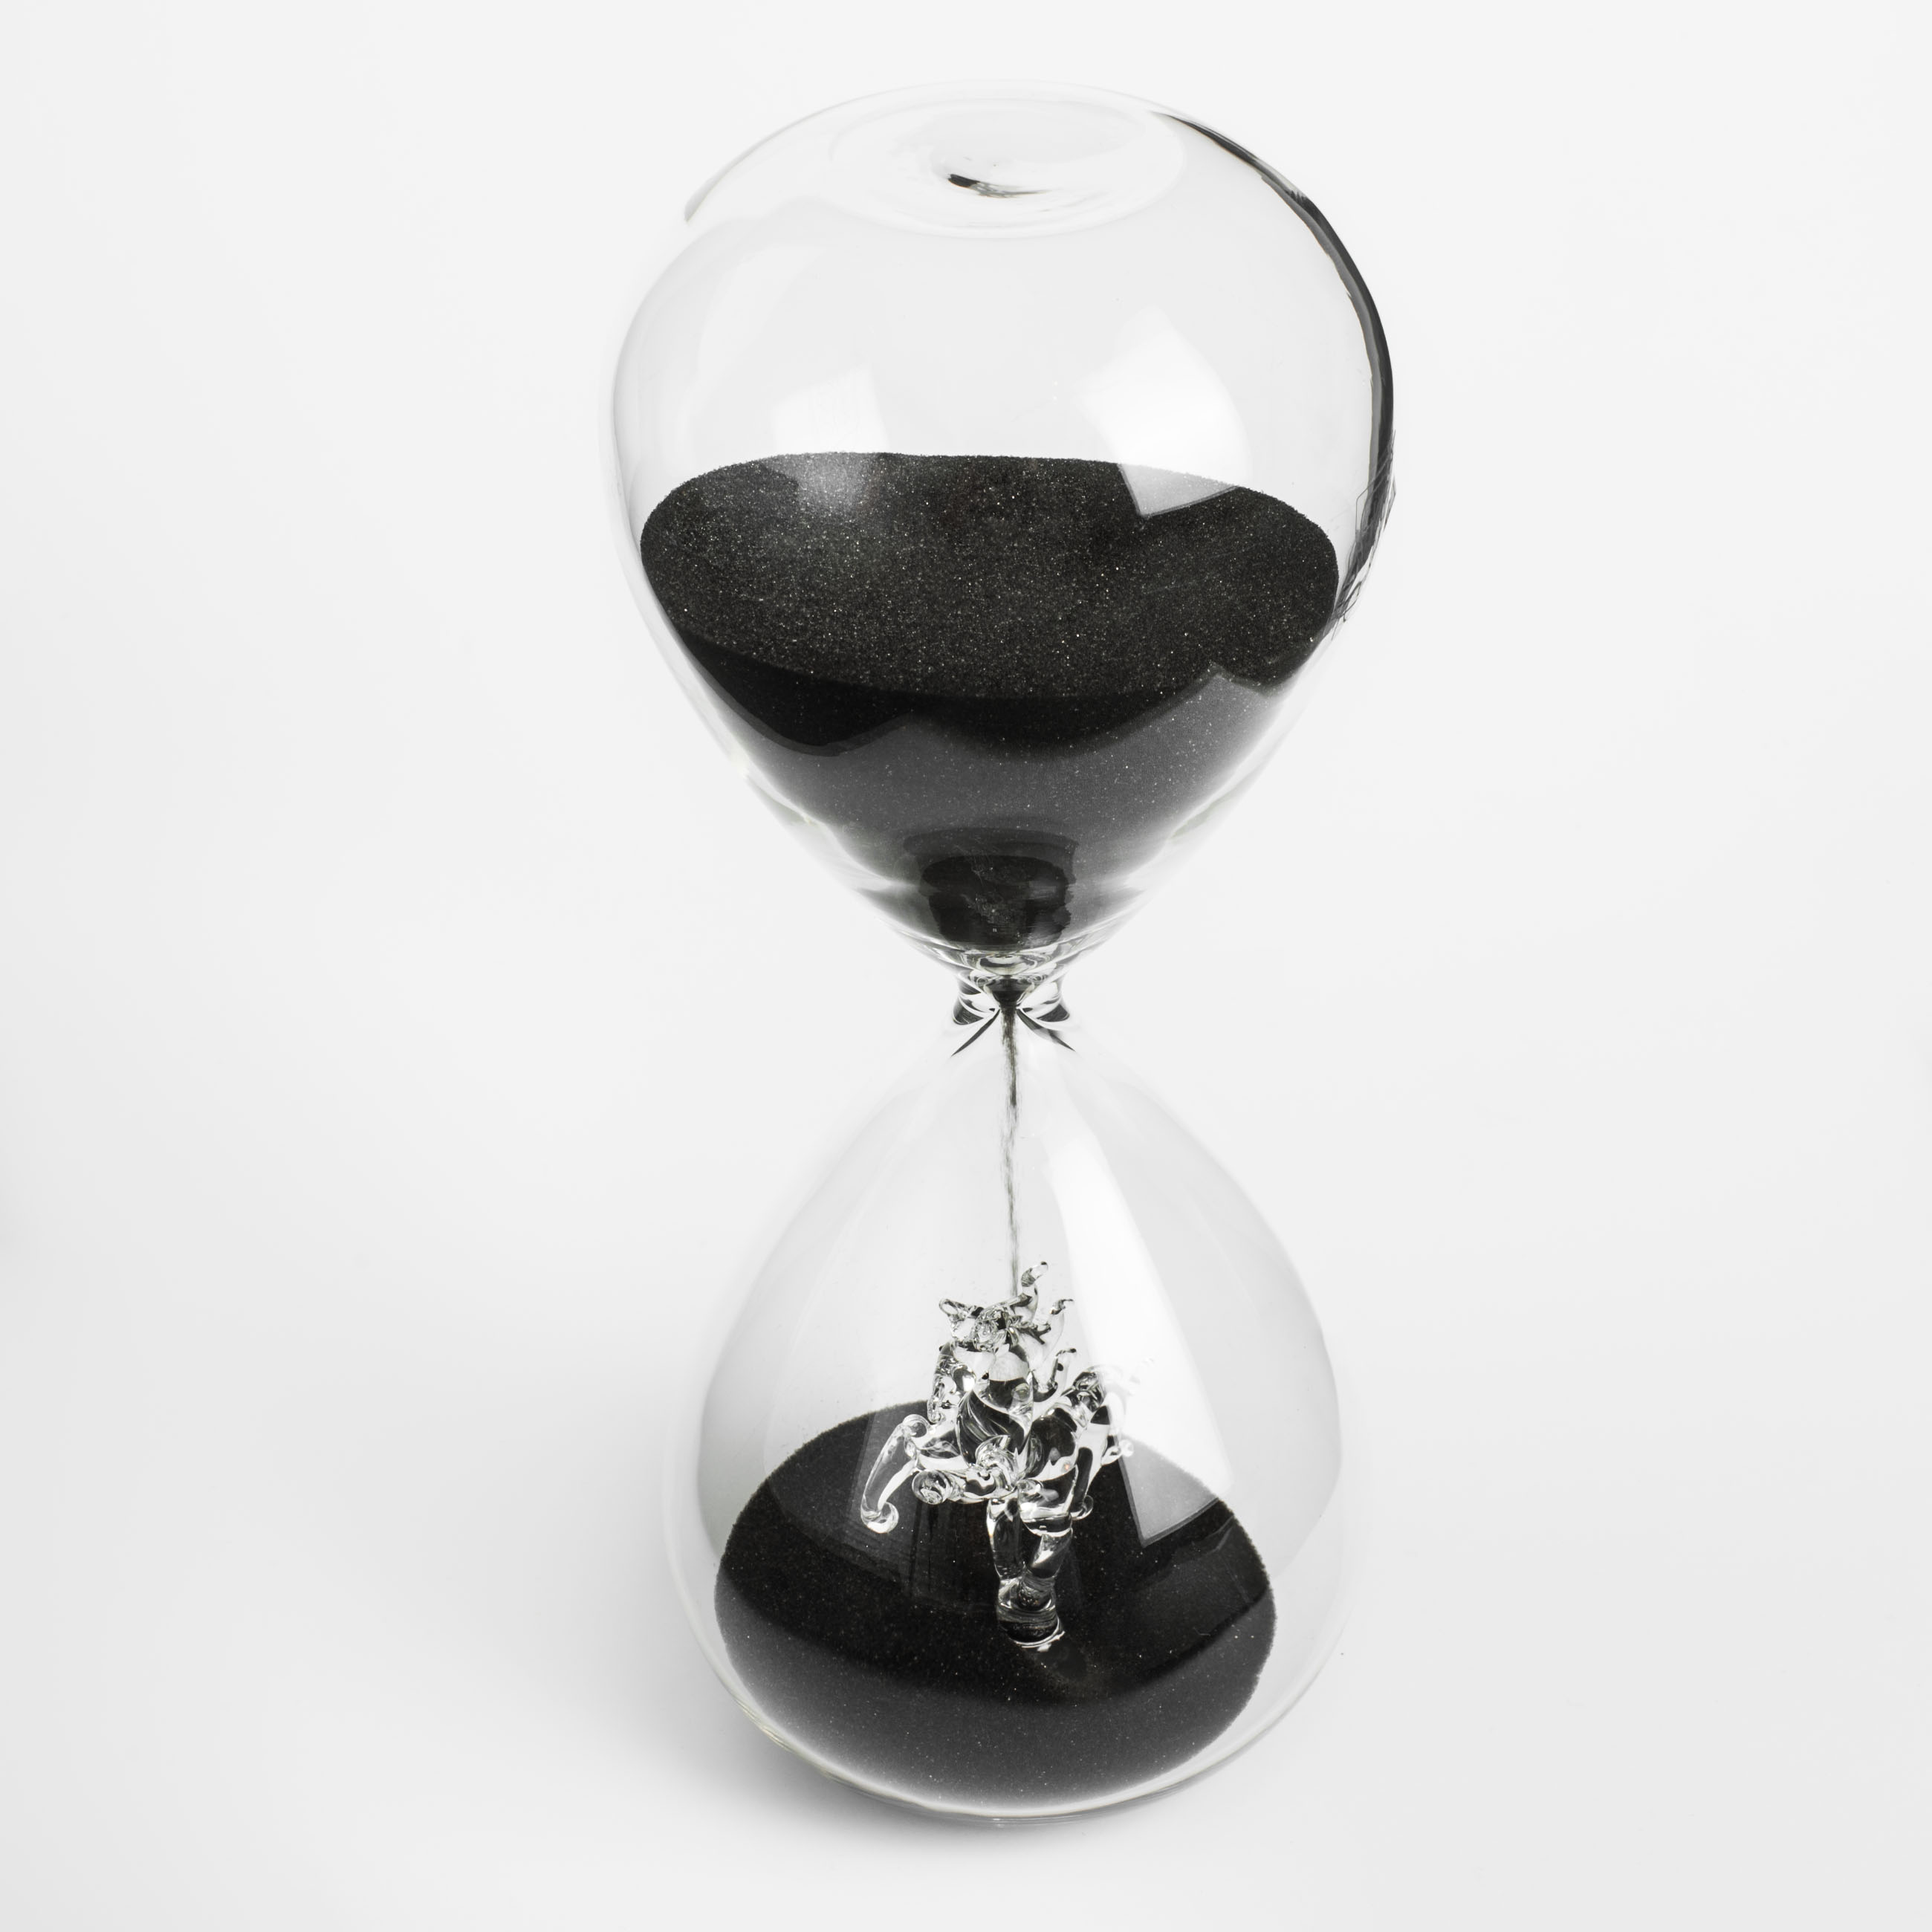 Hourglass clock, 20 cm, 15 minutes, Glass / sand, Horse in the sand, Sand time изображение № 2